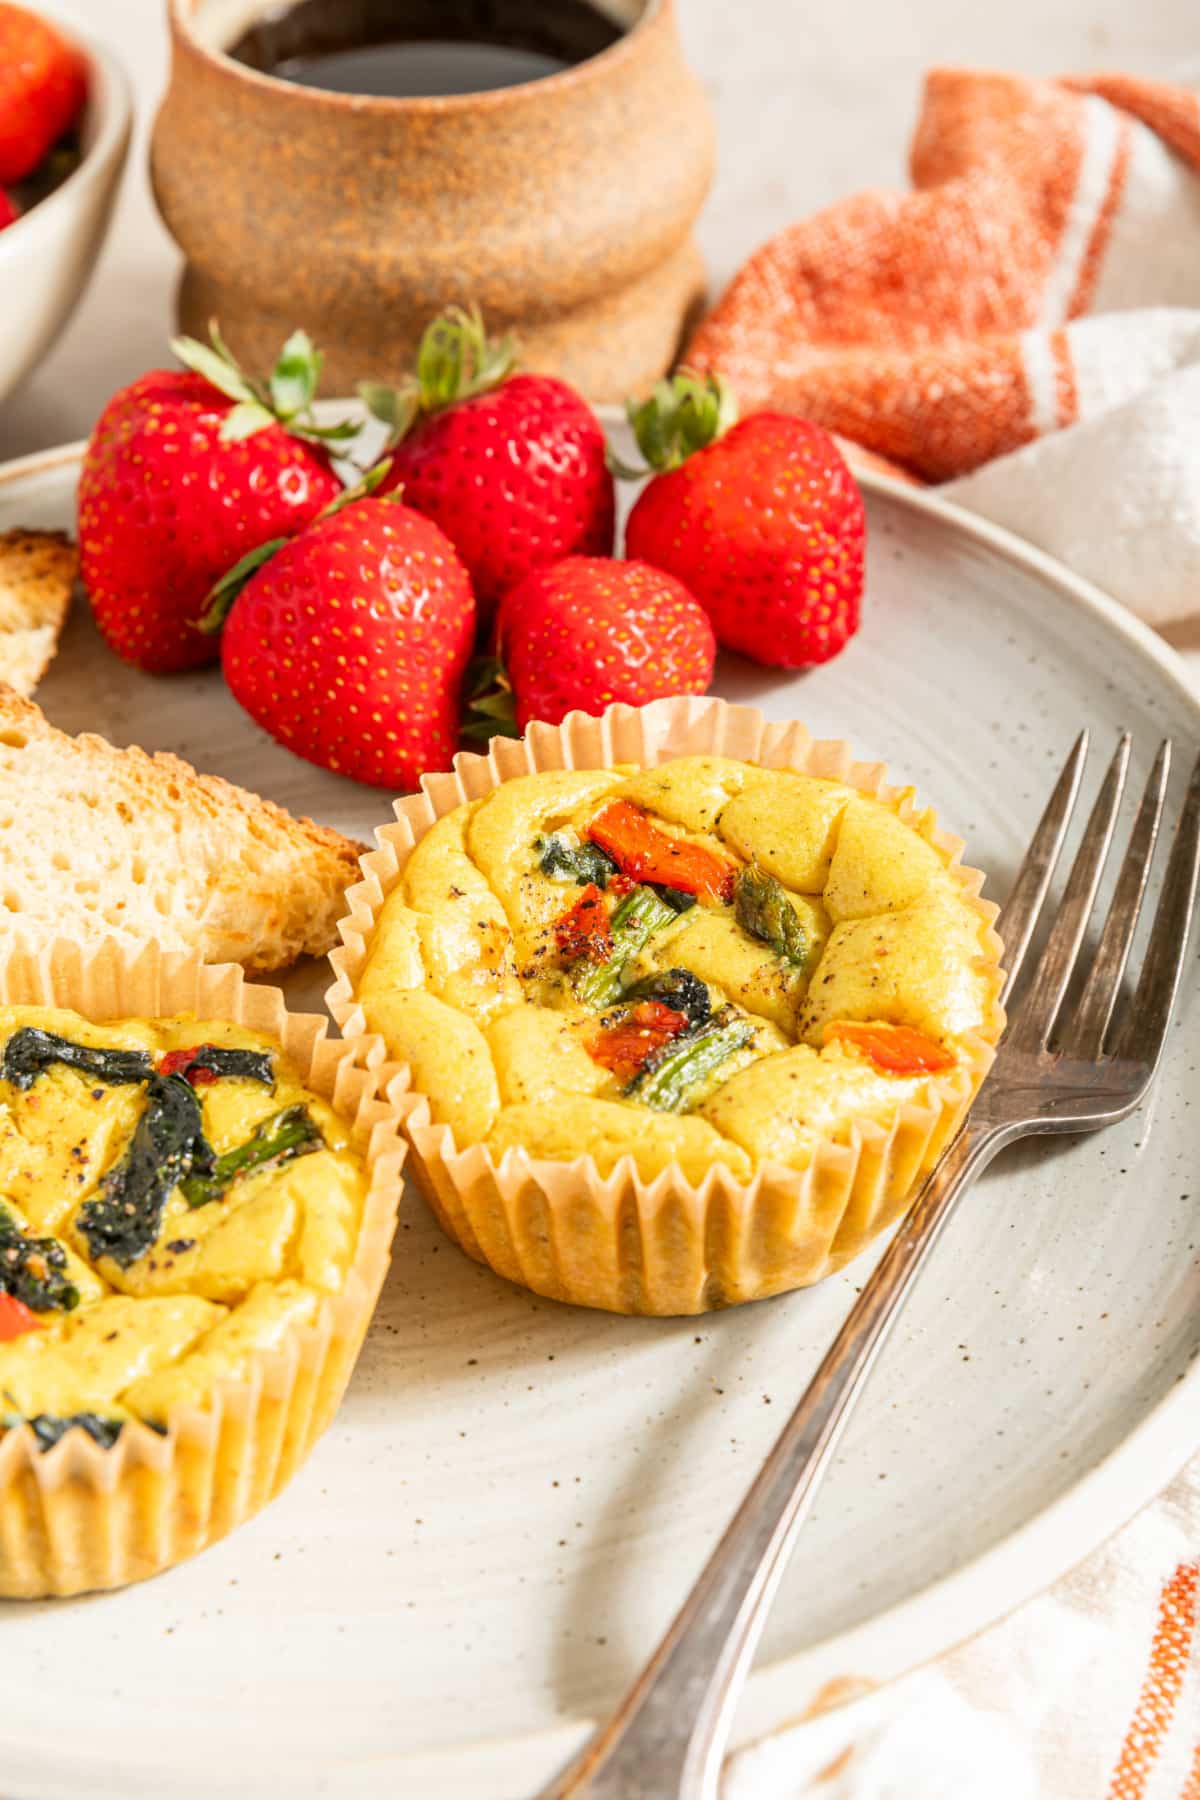 Two mini vegan quiche baked in cupcake liners are on a white plate with a fork, strawberries, and toast. The vegan egg bites are bright yellow from turmeric, and have red peppers, spinach, and asparagus in them.